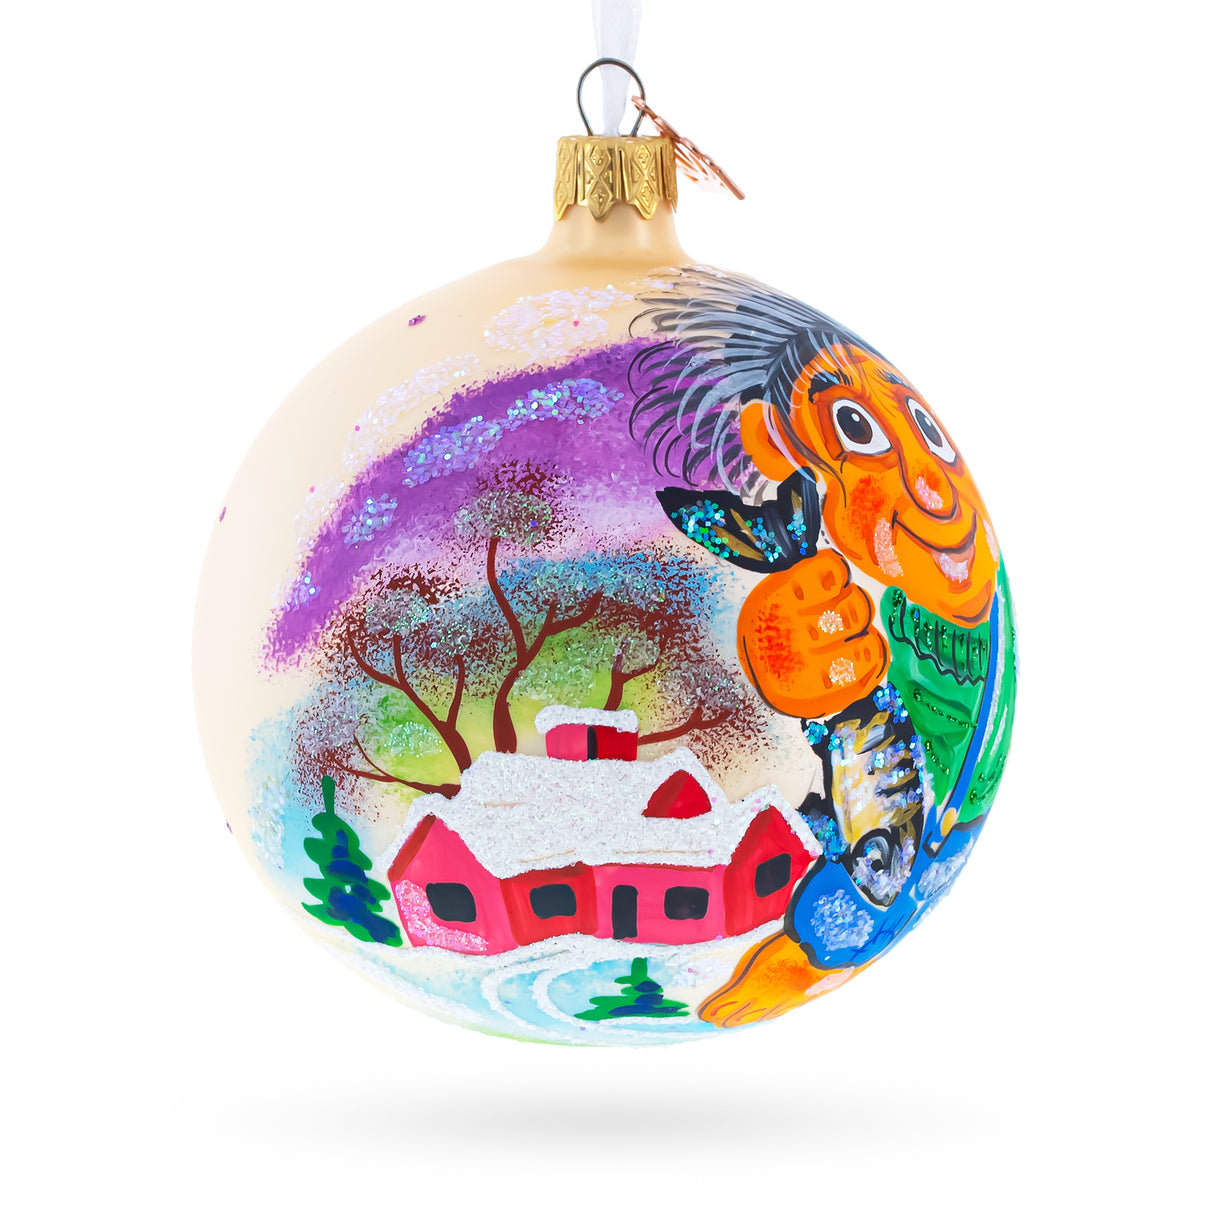 Fisherman's Catch: Troll the Fisherman Blown Glass Ball Christmas Ornament 4 InchesUkraine ,dimensions in inches: 4 x 4 x 4